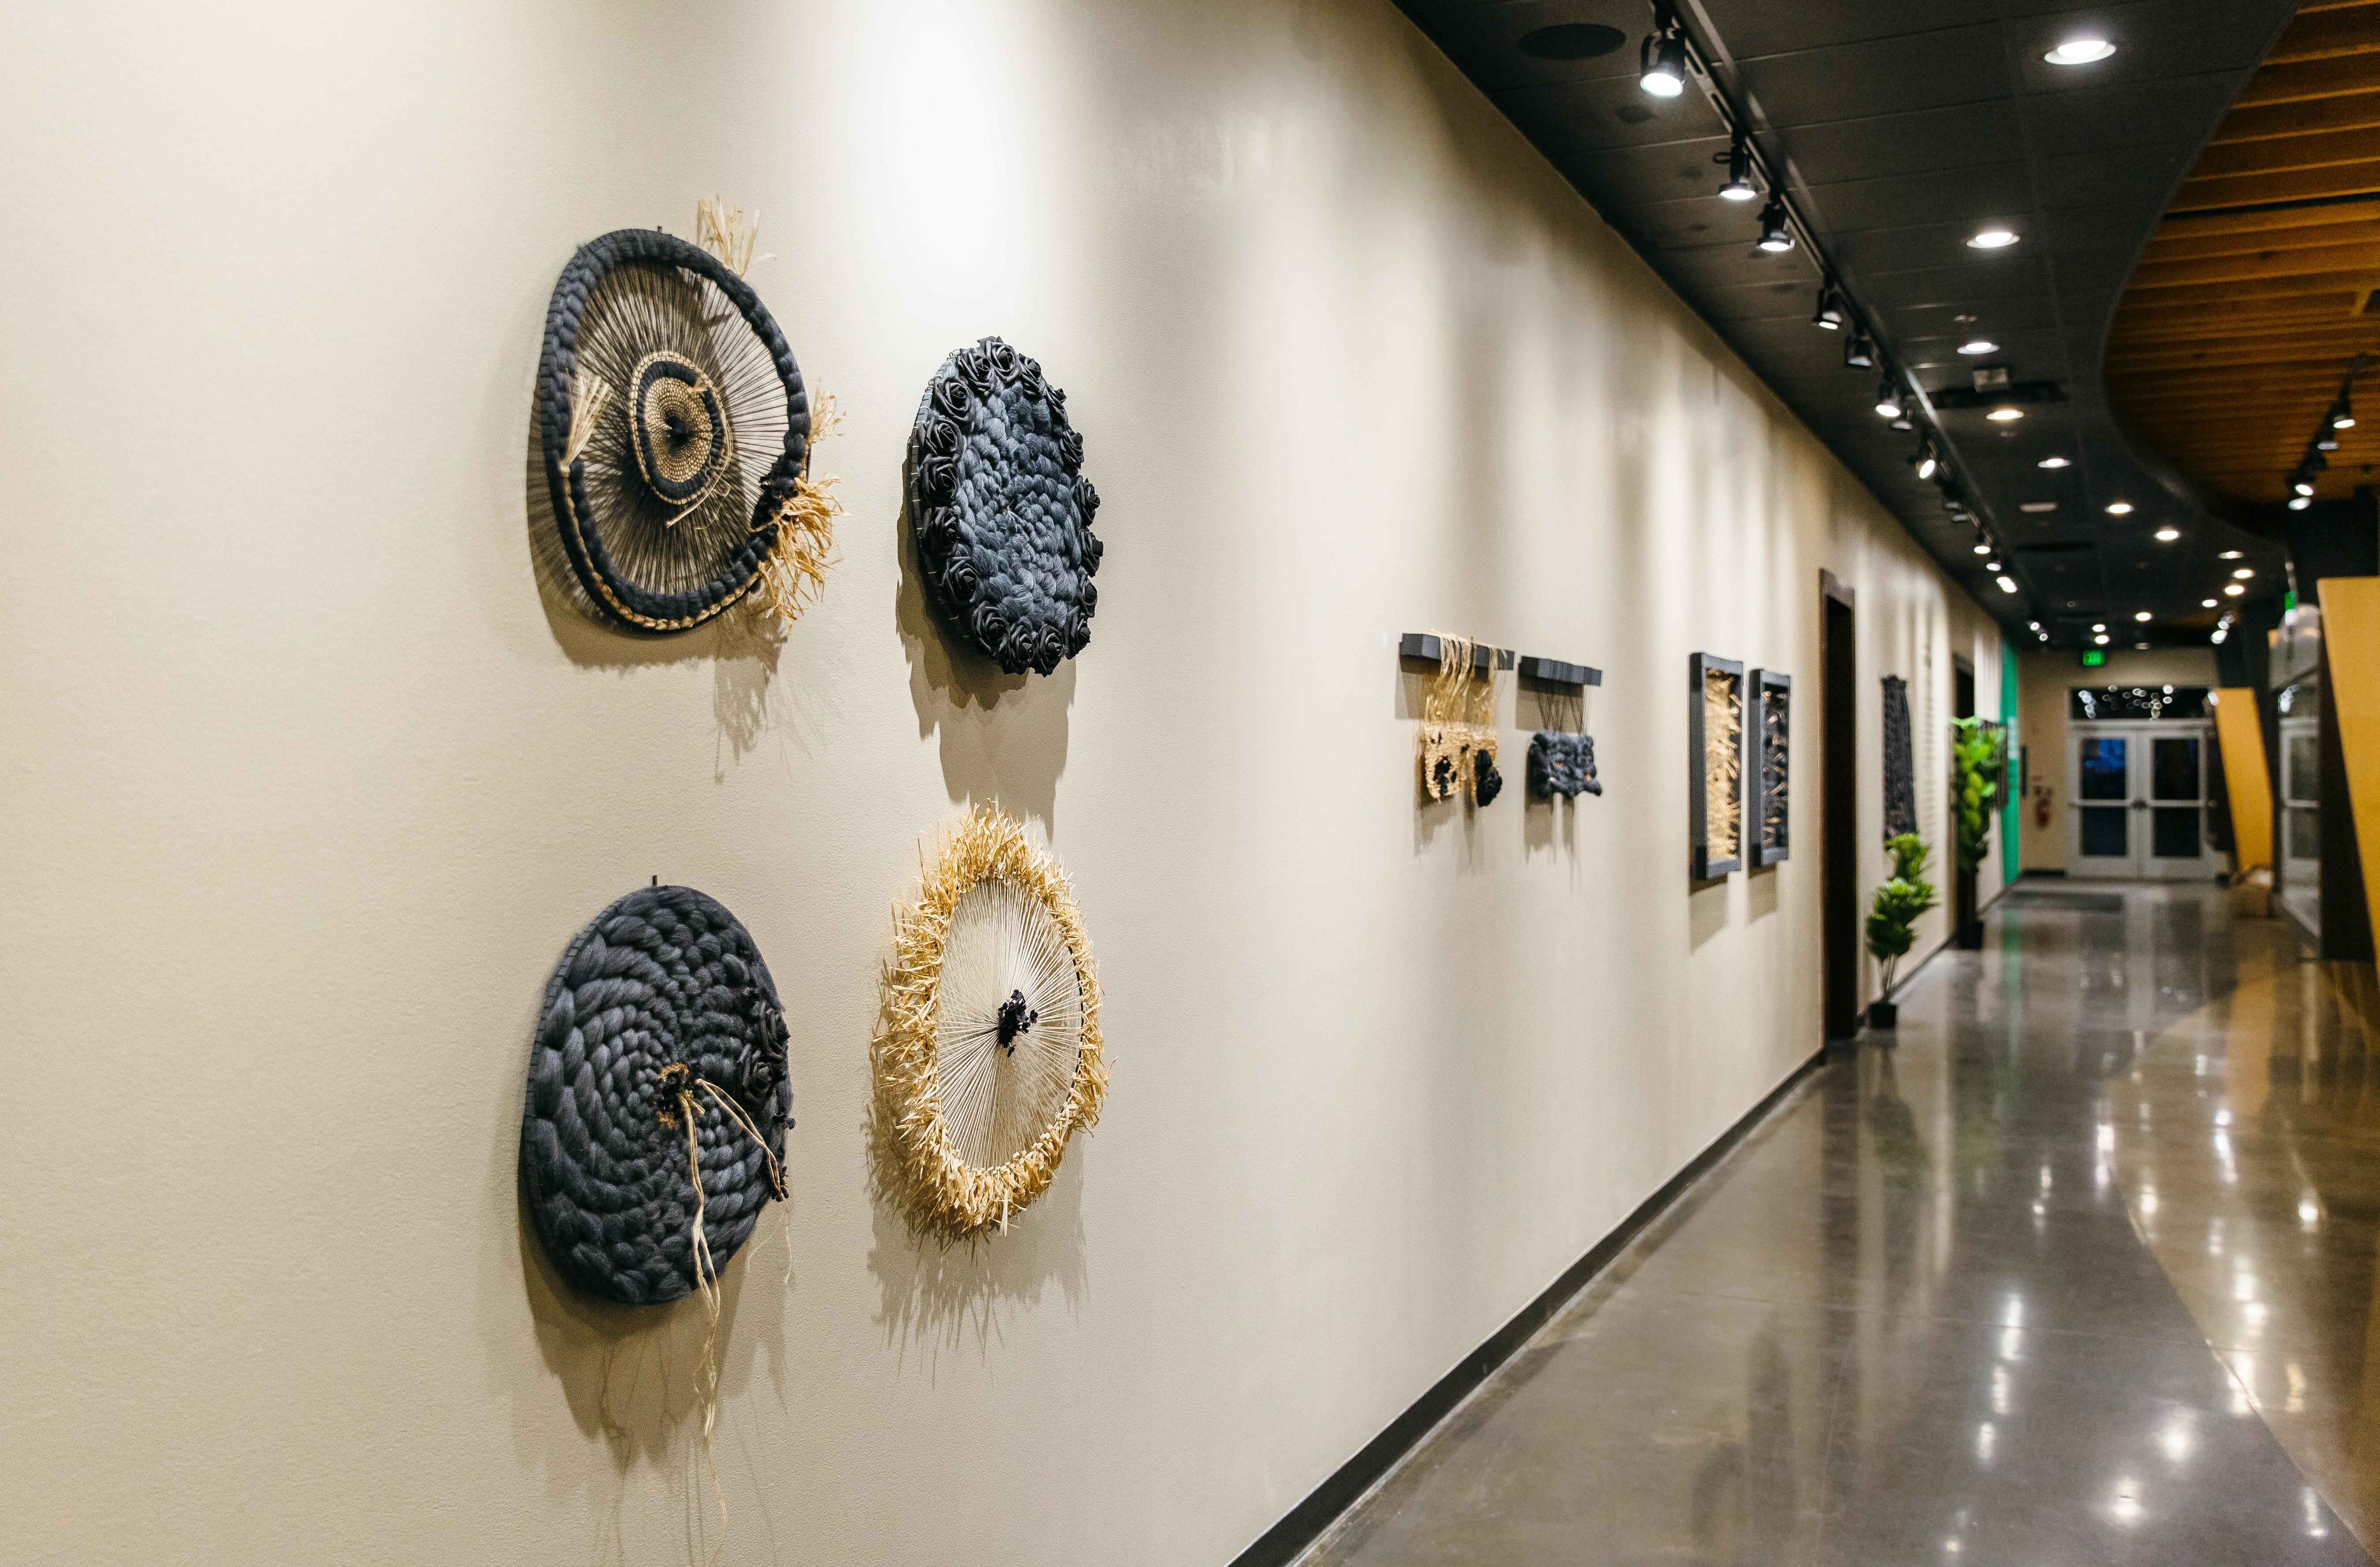 This circular woven sculptural wall hanging is created using raffia, cotton thread, artificial flowers, and latex paint on a wooden hoop. It is beige with black floral accents. The organic mixed media materials display beautifully on the wall.